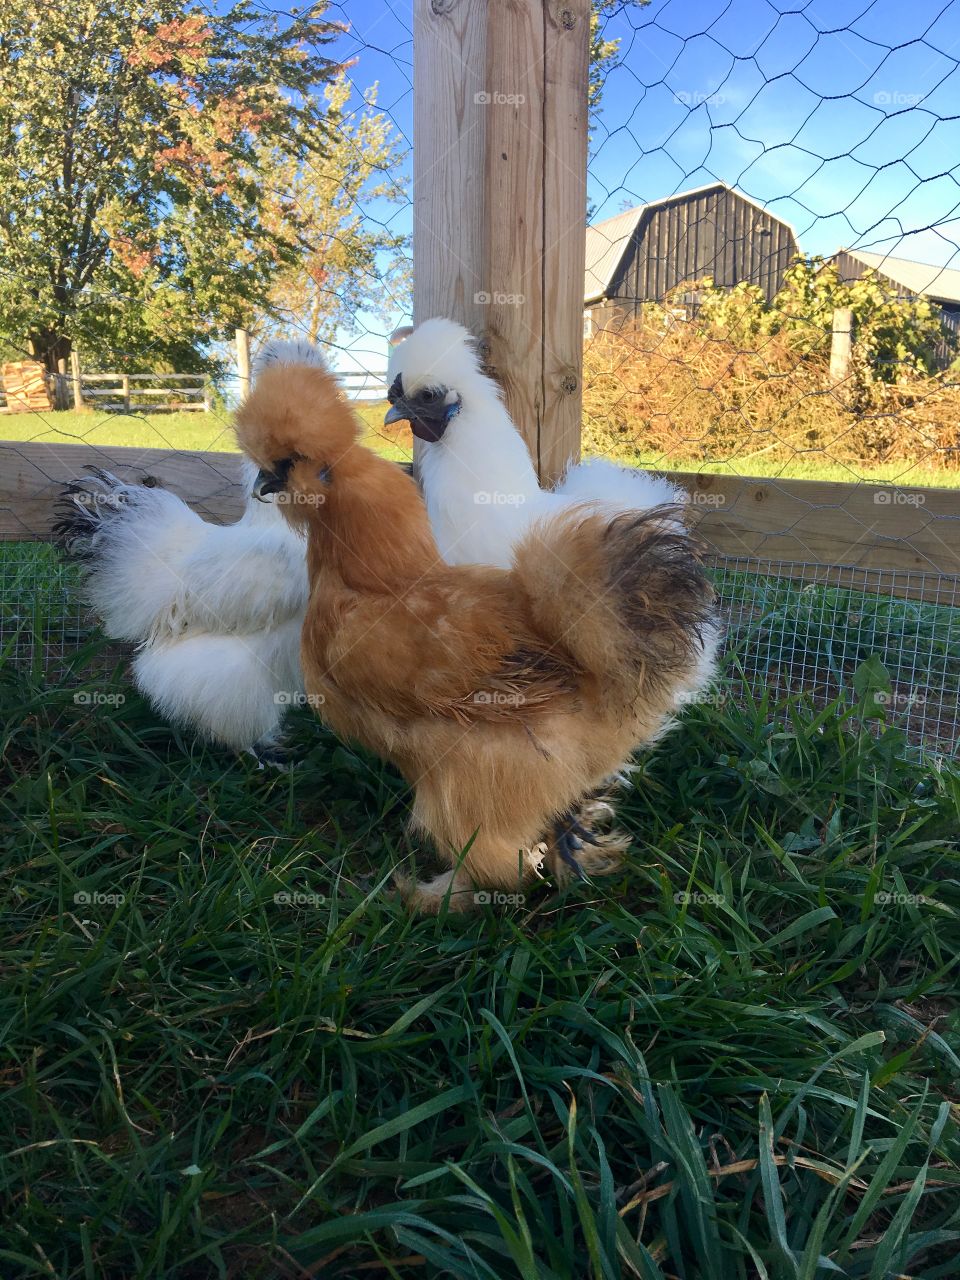 My three silkie hens standing amongst lush green grass. The sky is a beautiful piercing blue with some fluffy clouds. The barn is in the background and you can see some brush that needs to be burned. Big tree and white fence too.